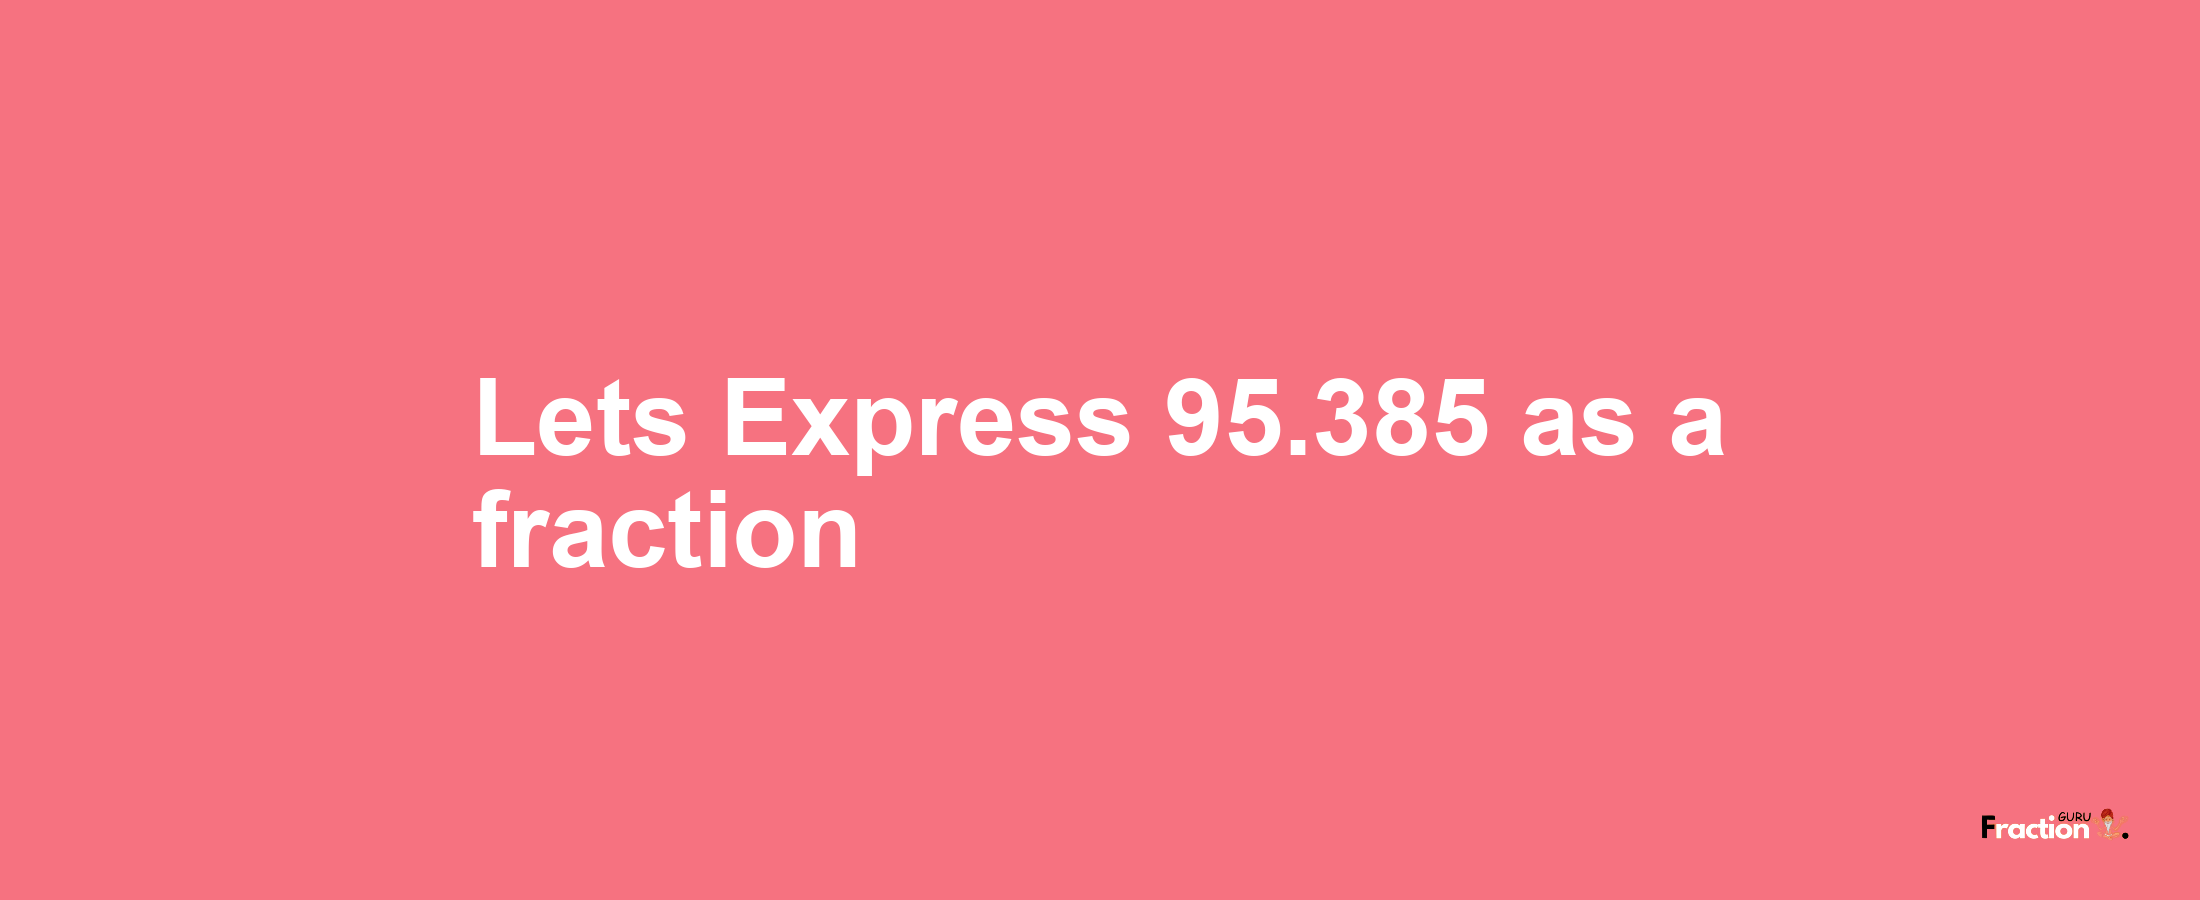 Lets Express 95.385 as afraction